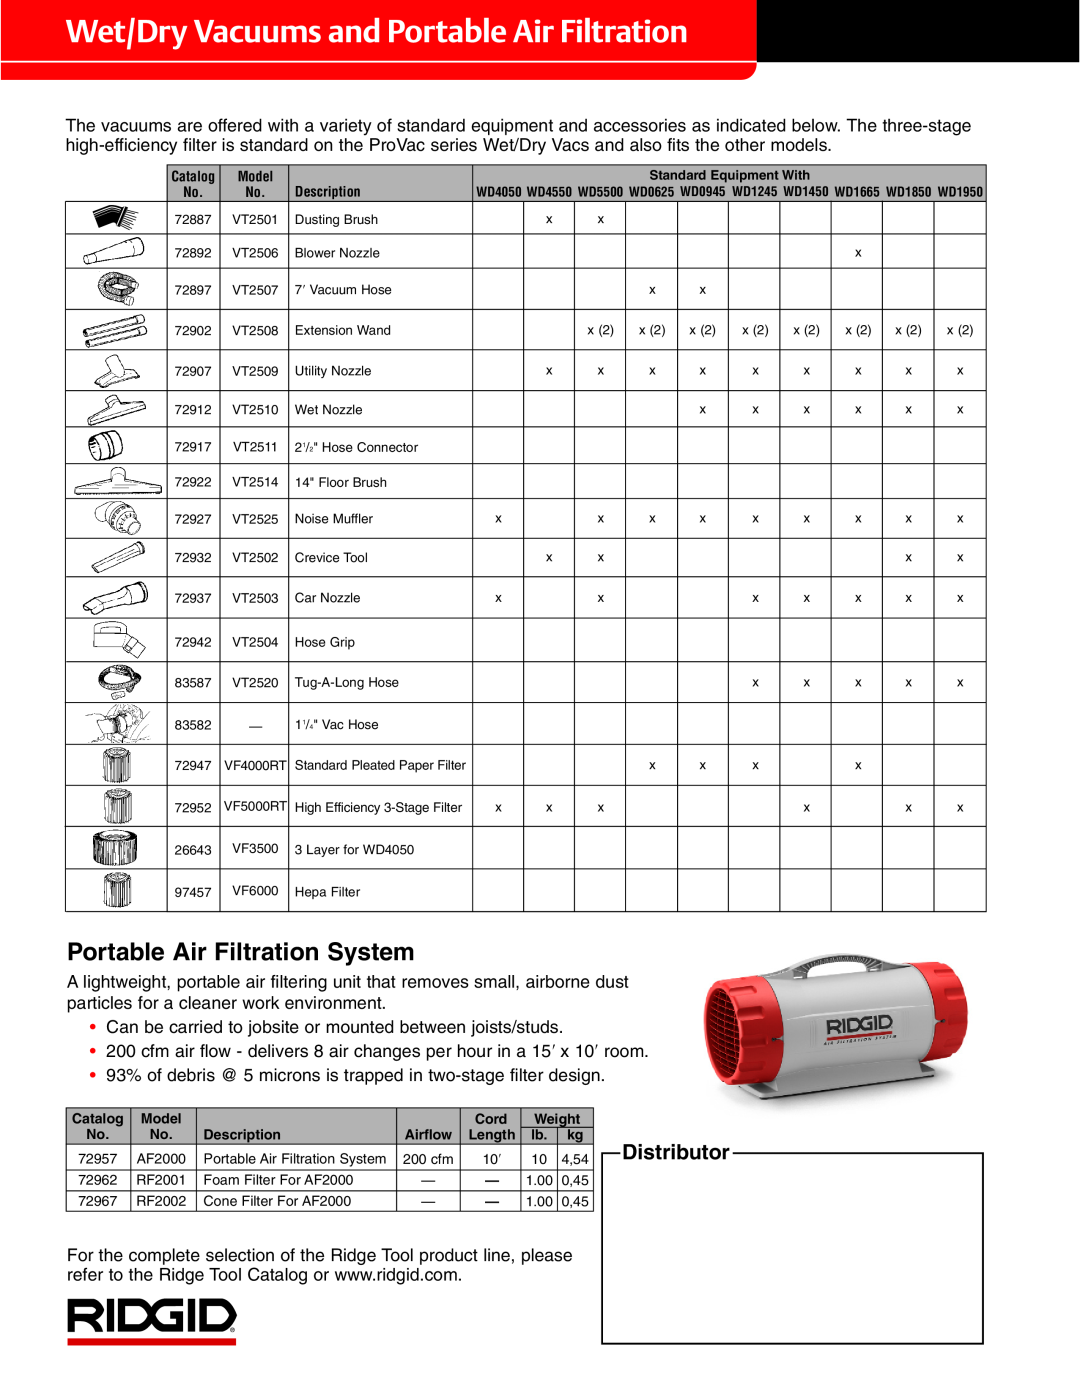 RIDGID AC140011, WD2450, AC471811 Wet/Dry Vacuums and Portable Air Filtration, Portable Air Filtration System, Distributor 